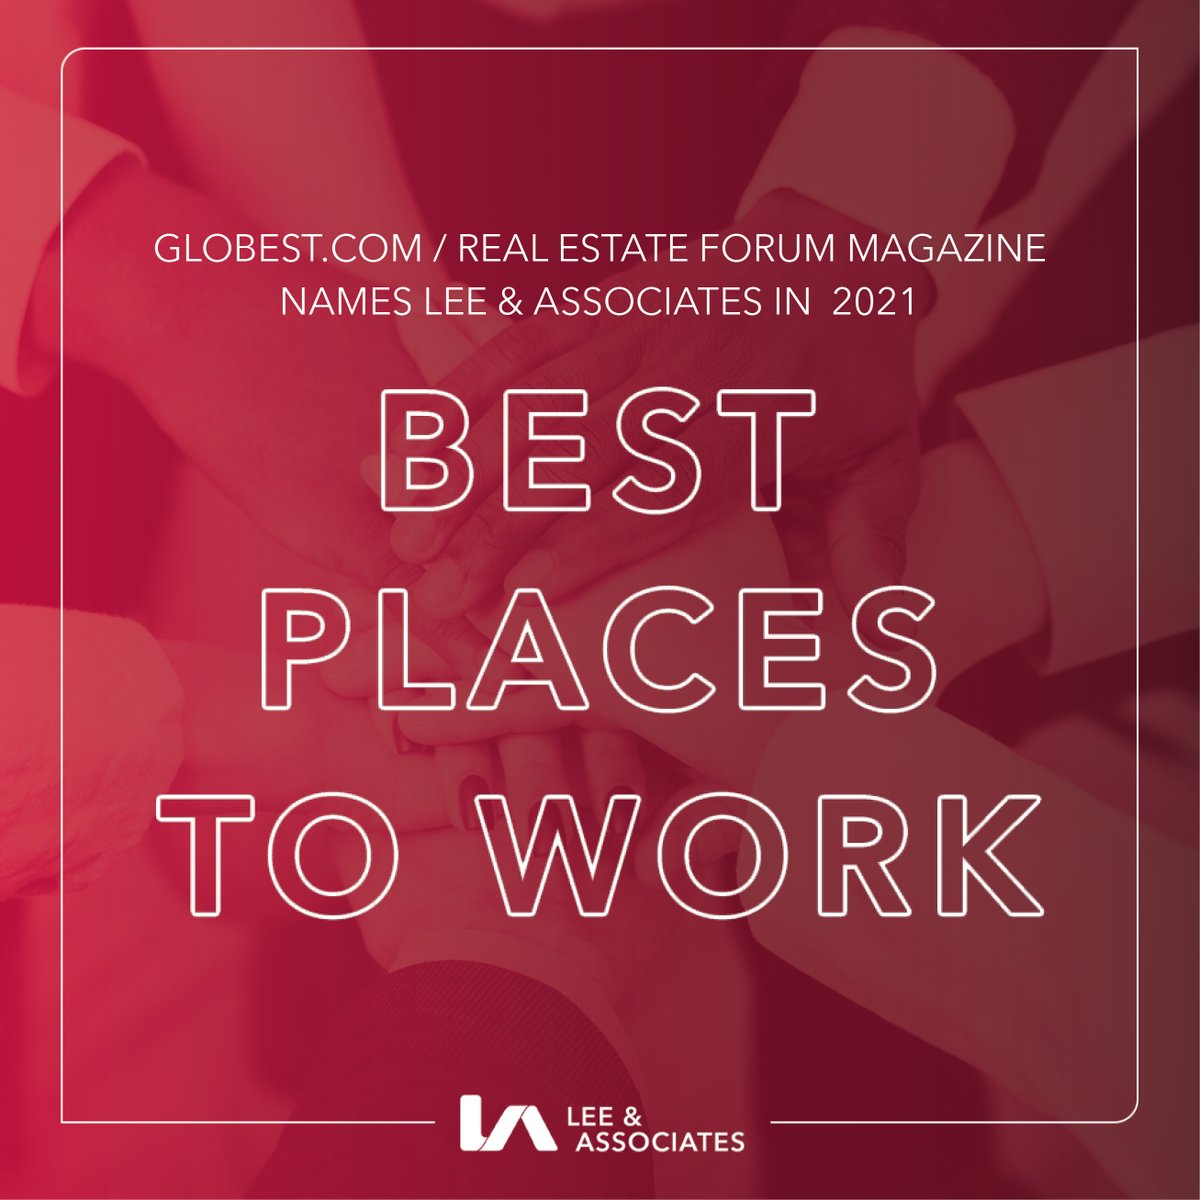 Lee & Associates is proud to be named as one of GlobeSt's 2021 Best Places to Work! 

 #LeeAtlanta #CRE #LeeandAssociates #Congratulations #Globestreet#CommercialRealEstate #AtlantaCRE